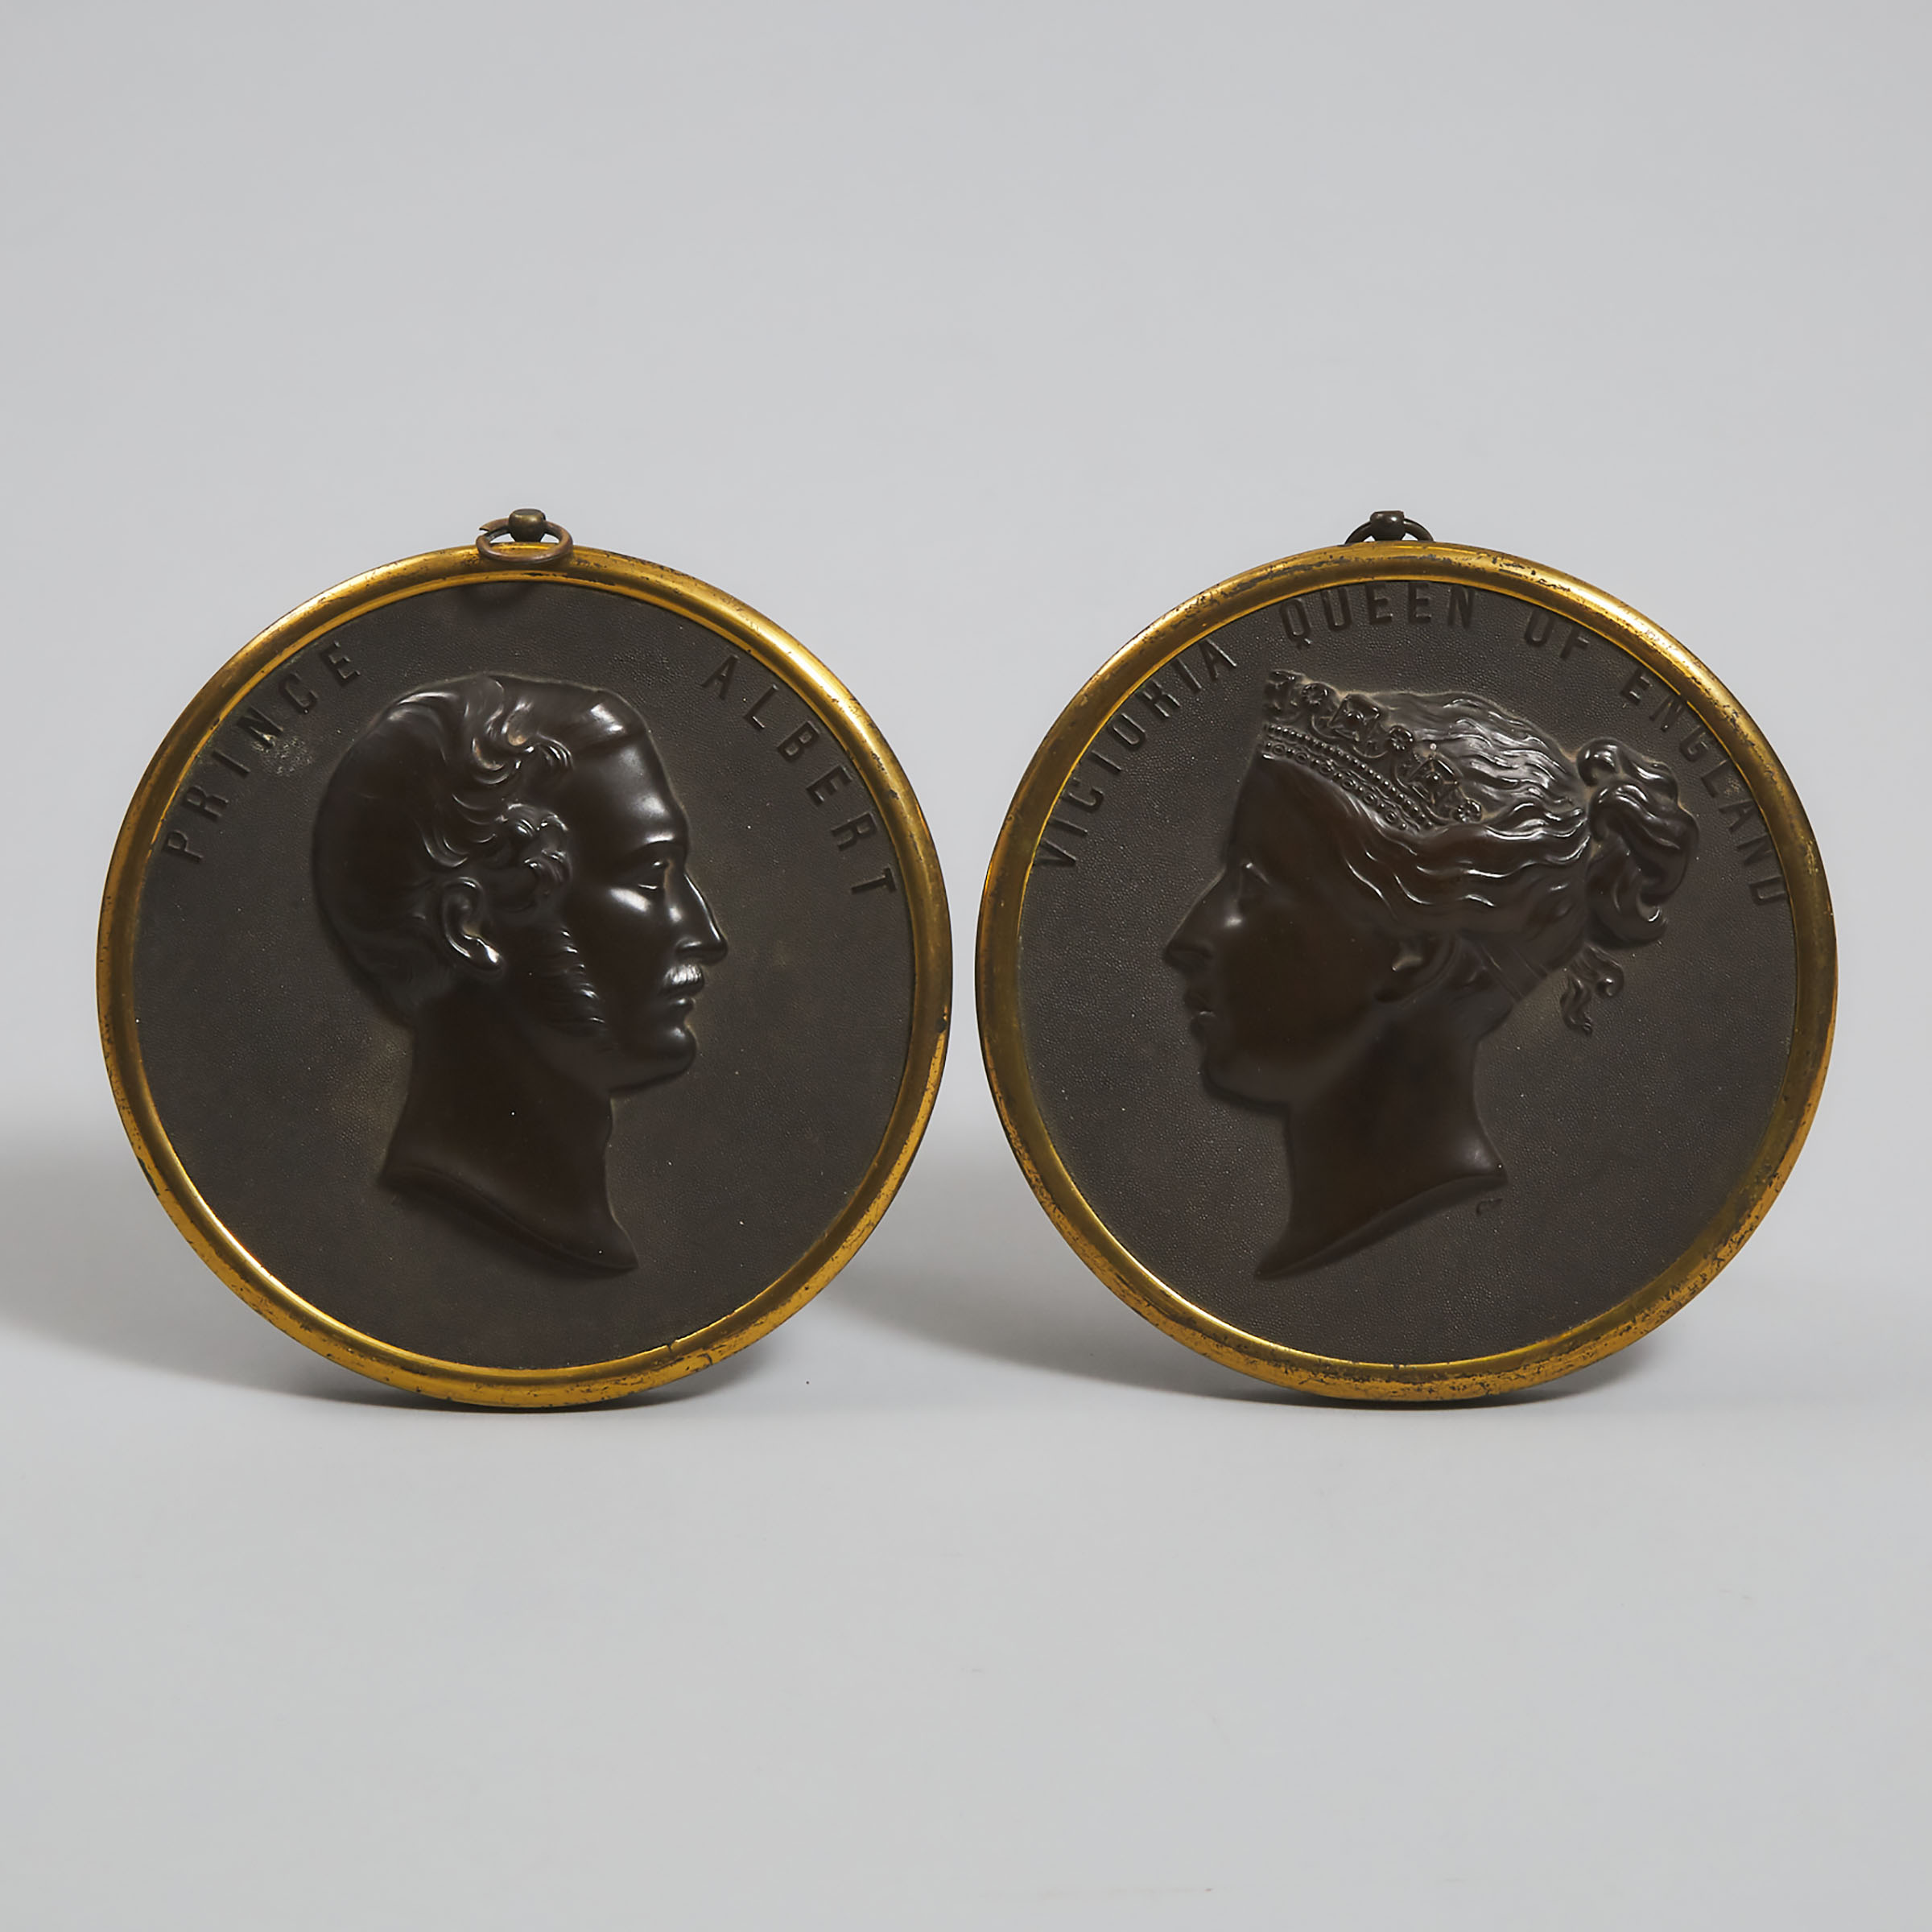 Pair of 'Bois Durci' Portrait Medallions with Profiles of Queen Victoria and Prince Albert, c.1860